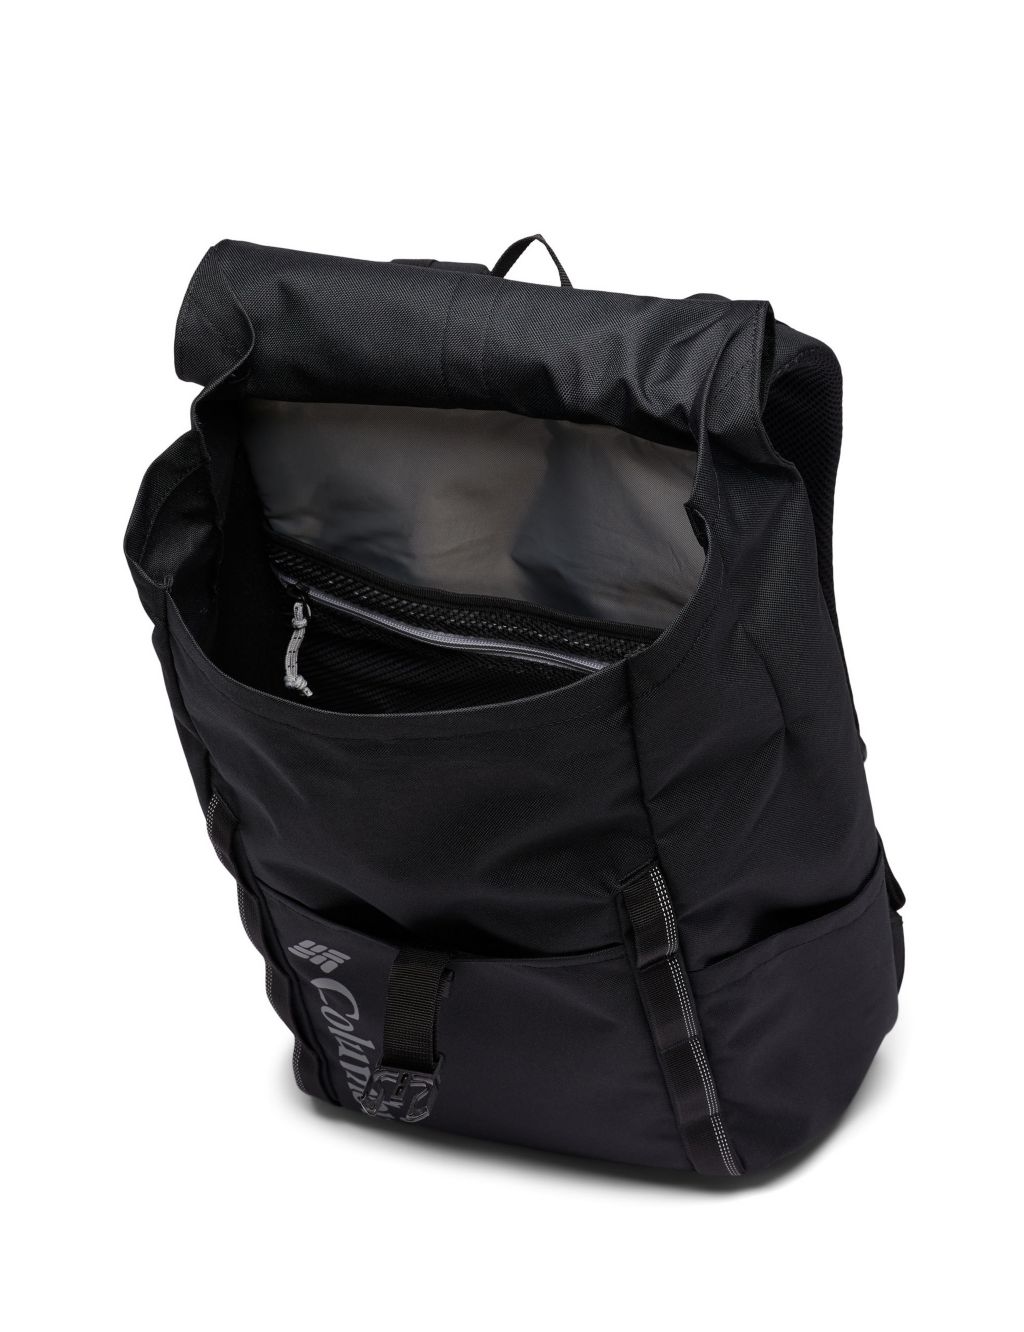 Convey 24L Backpack image 3